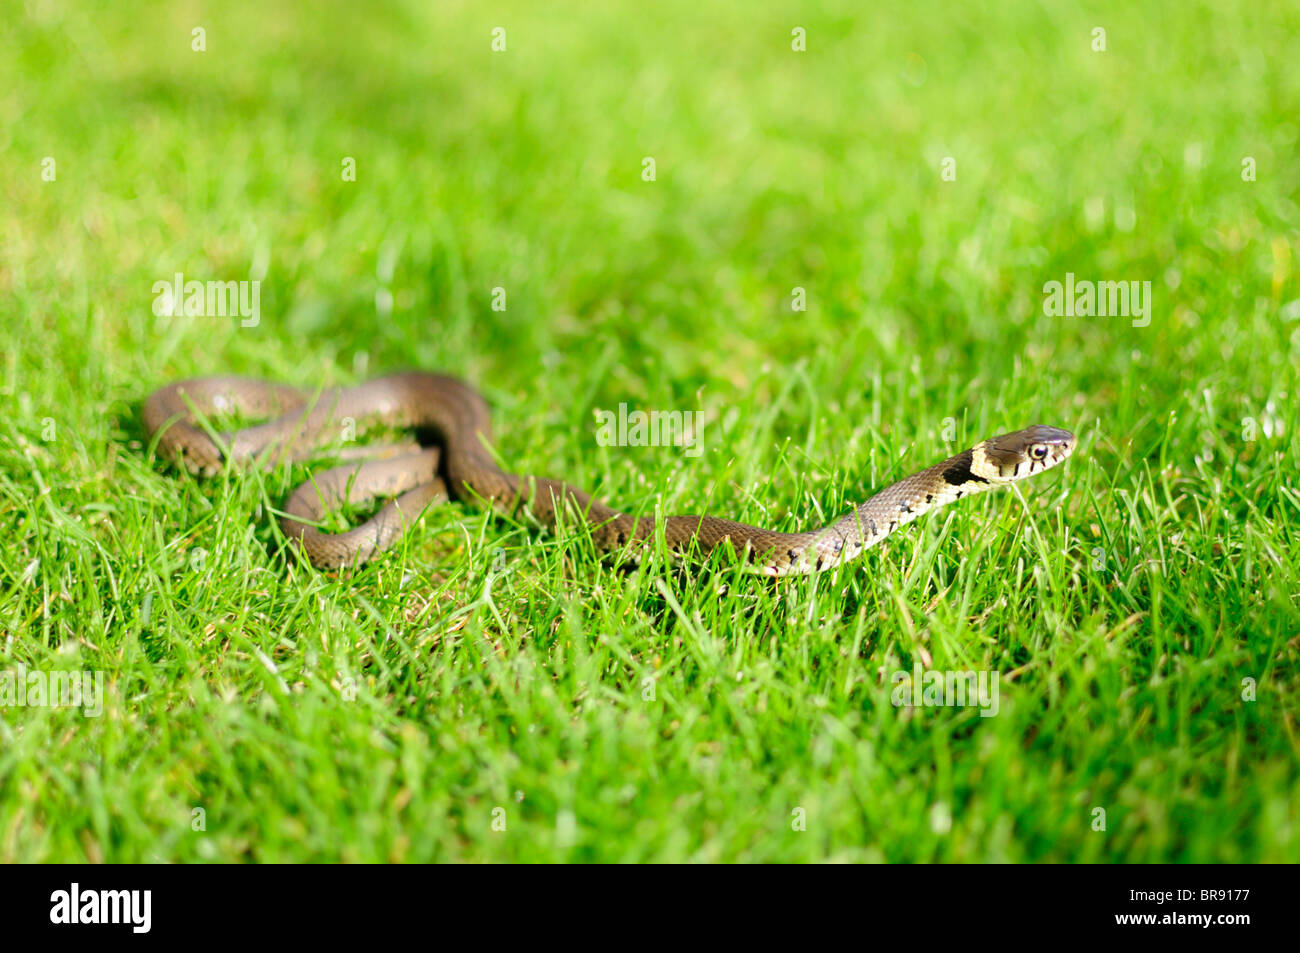 A small curled grass snake on a lawn, with its head raised. Stock Photo